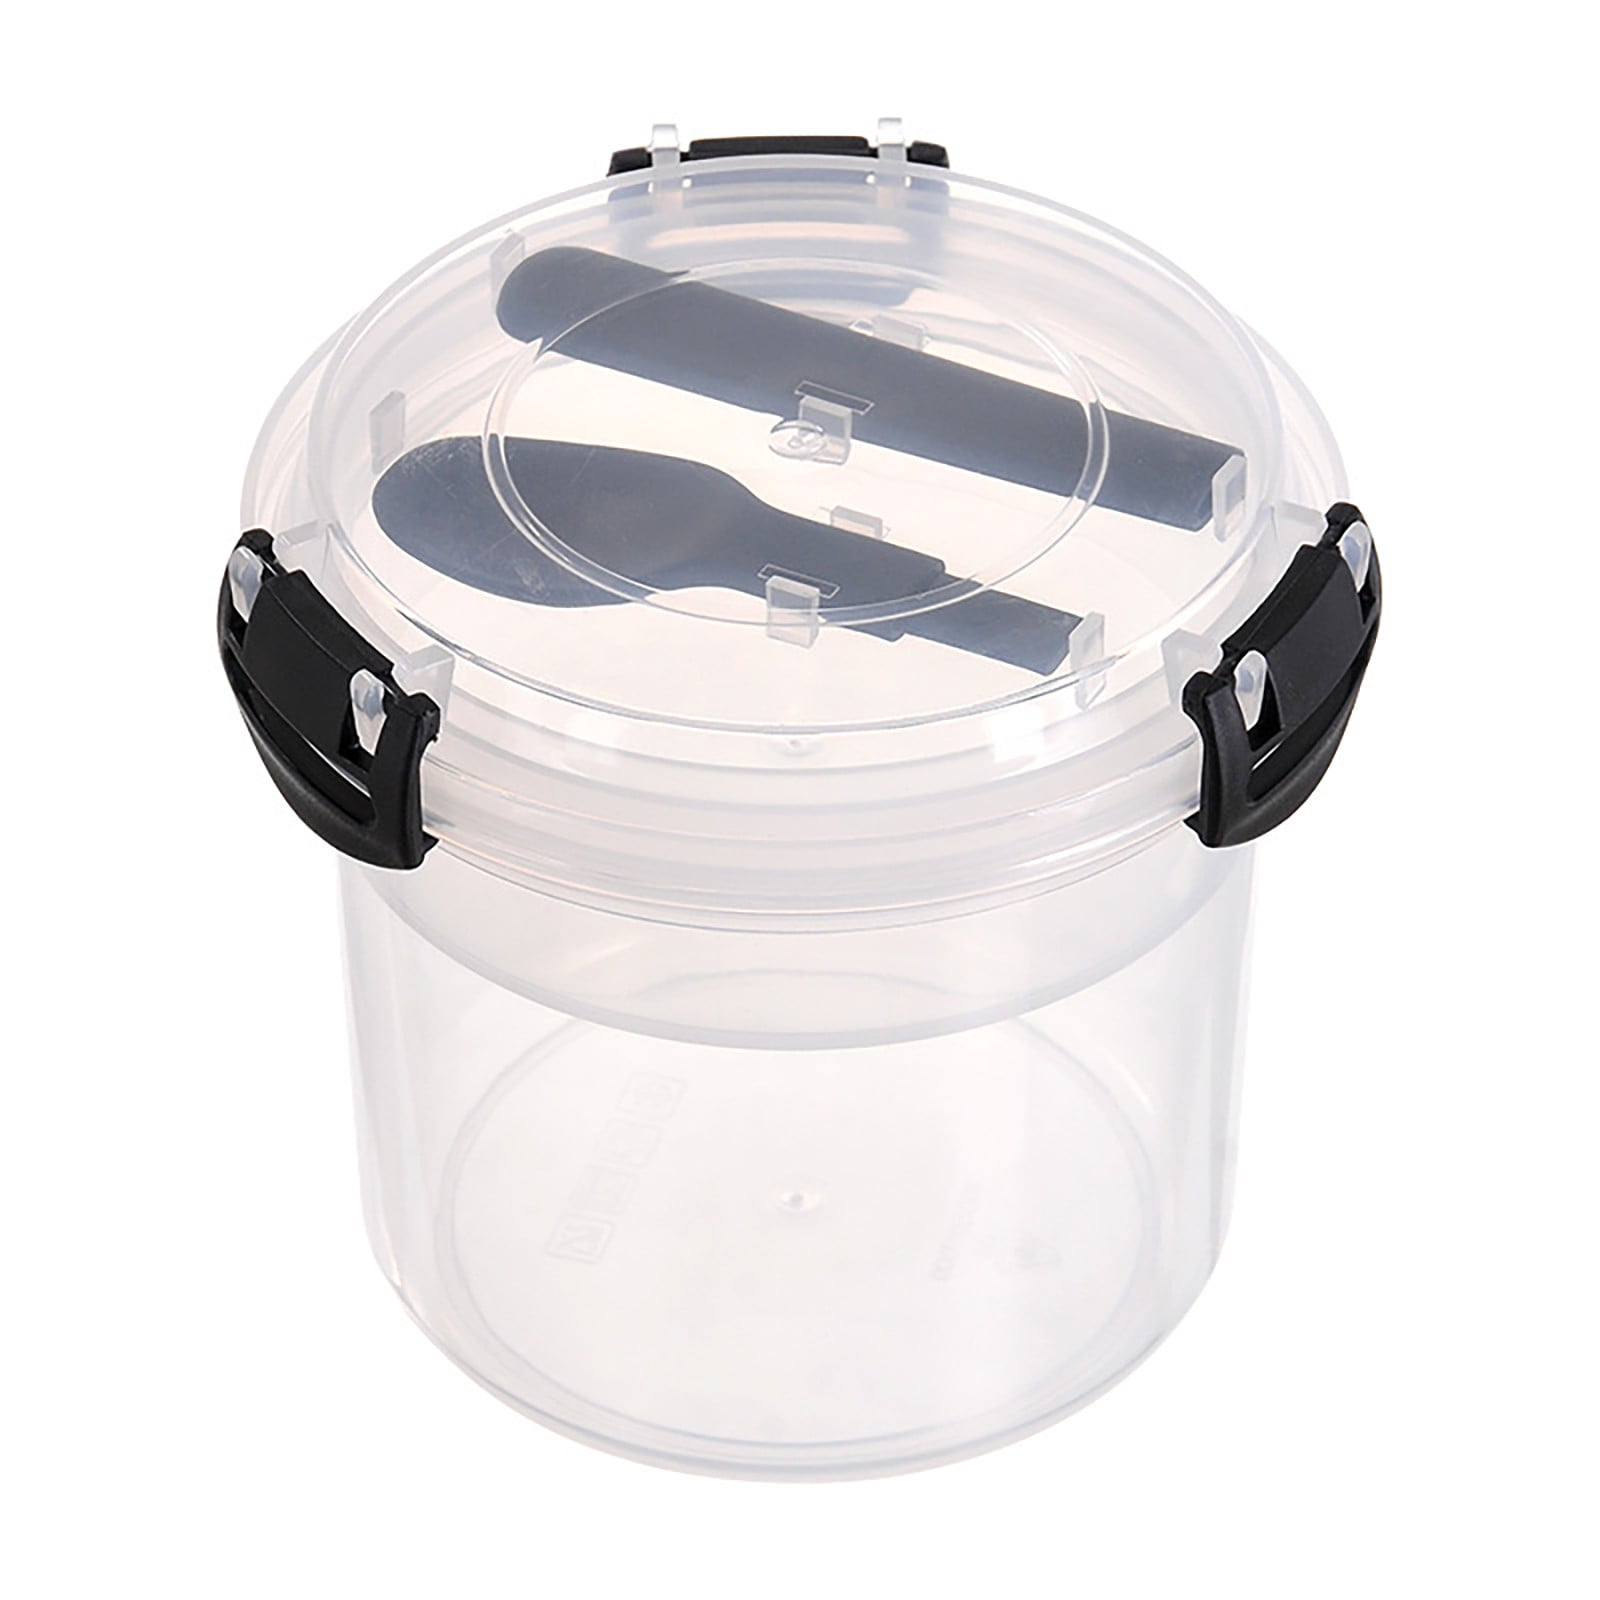 4Pcs Overnight Oats Container with Spoon 13.5oz Leakproof